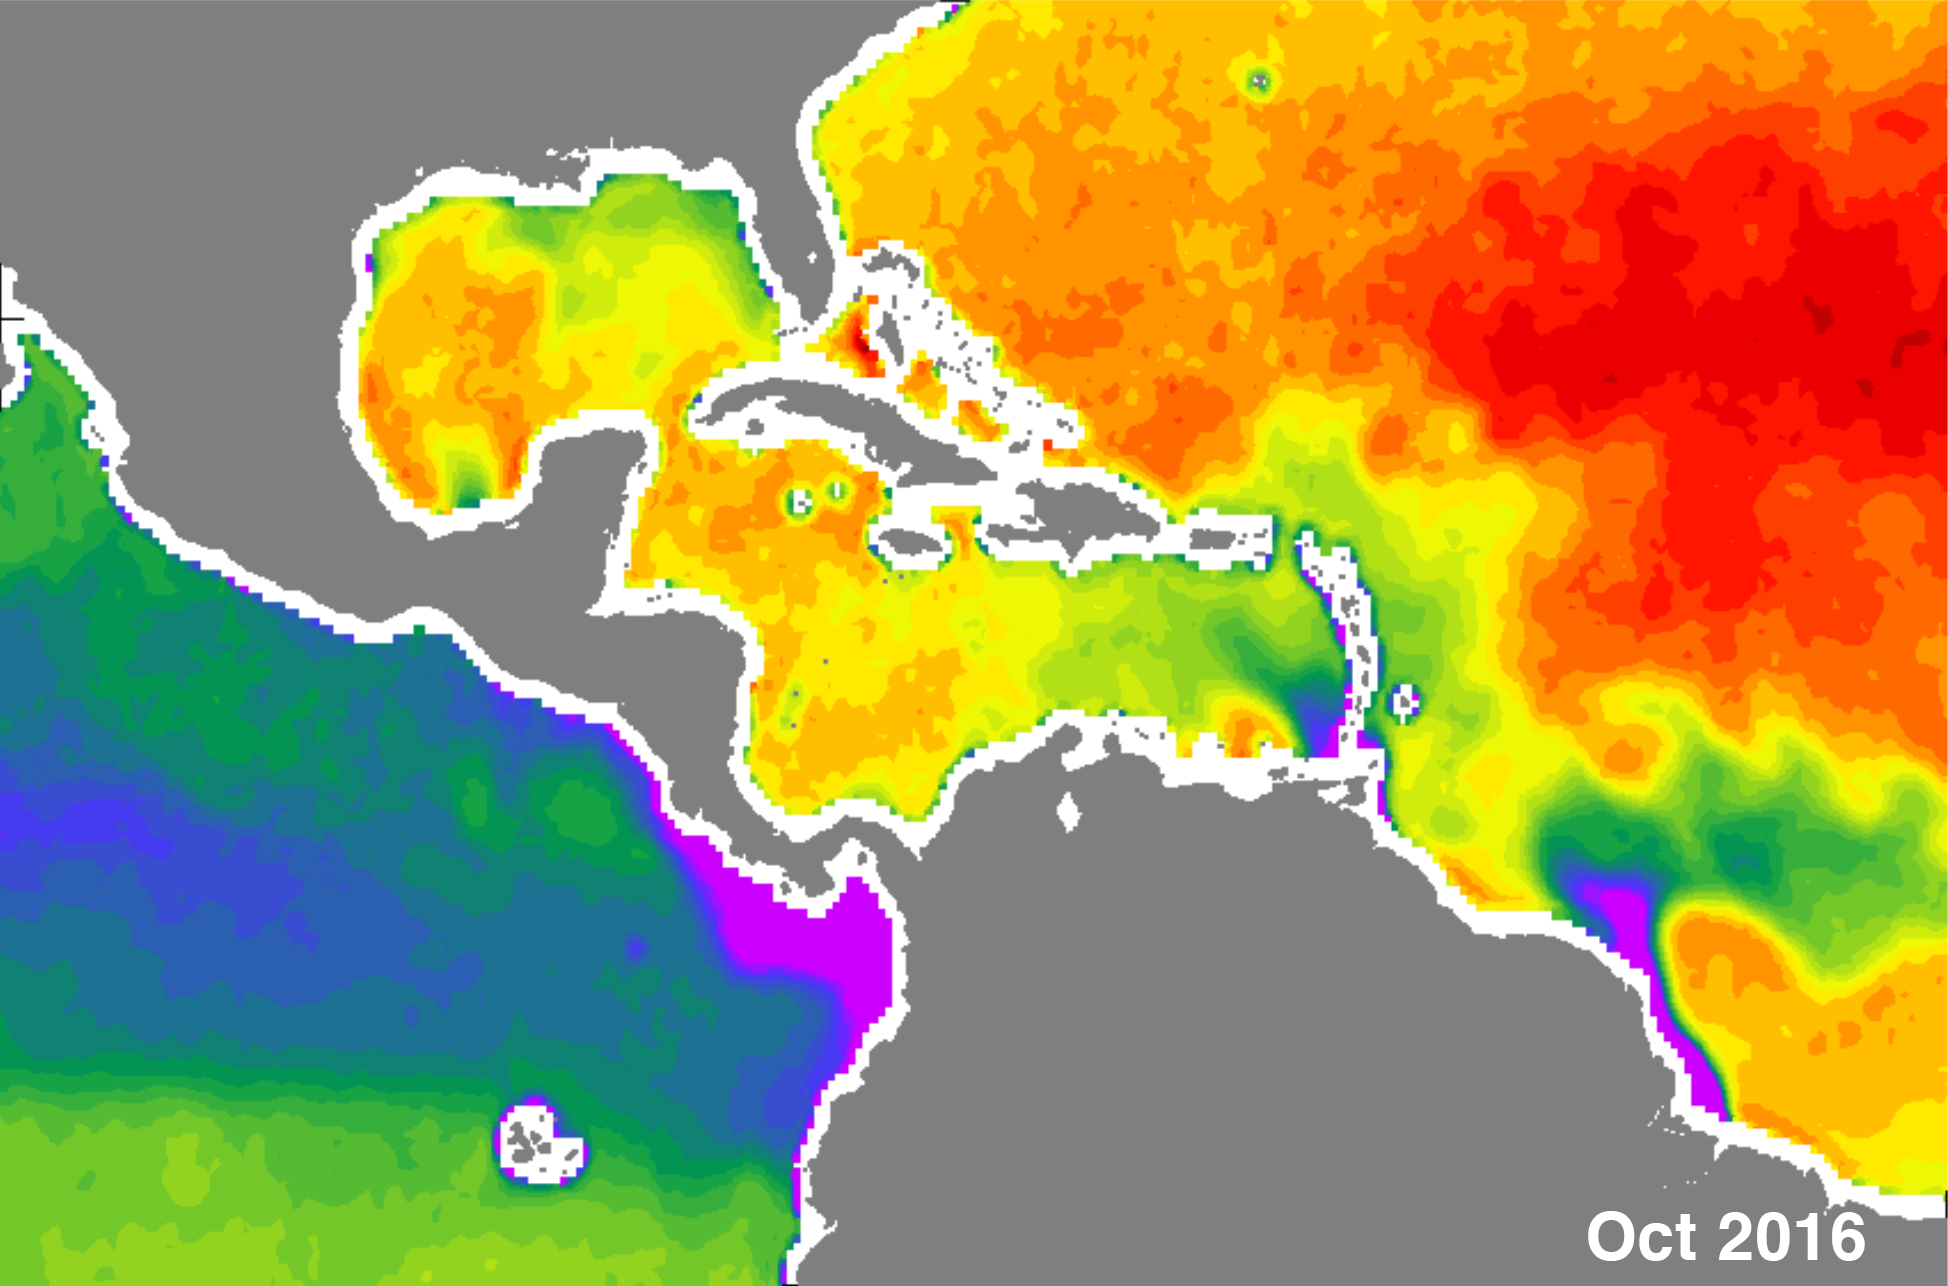 Sea surface salinity in the Gulf of Mexico